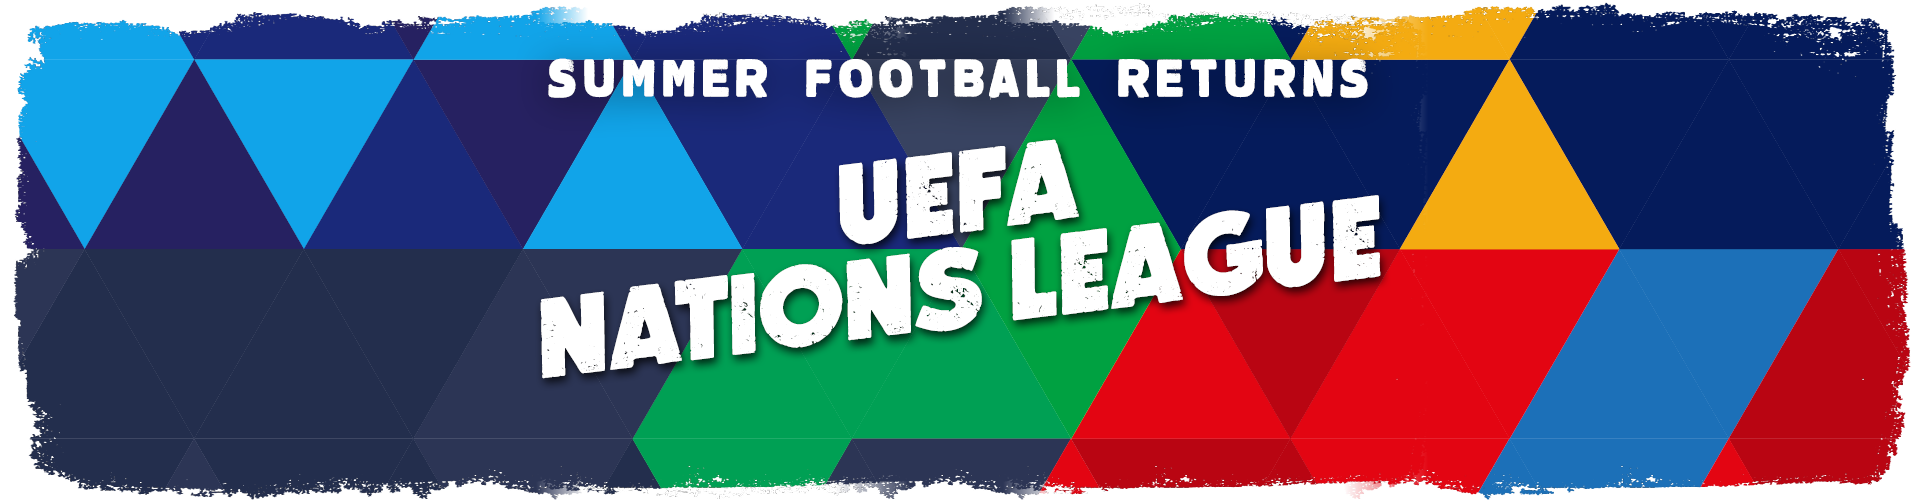 Summer football returns - UEFA Nations League from Wed 1st June